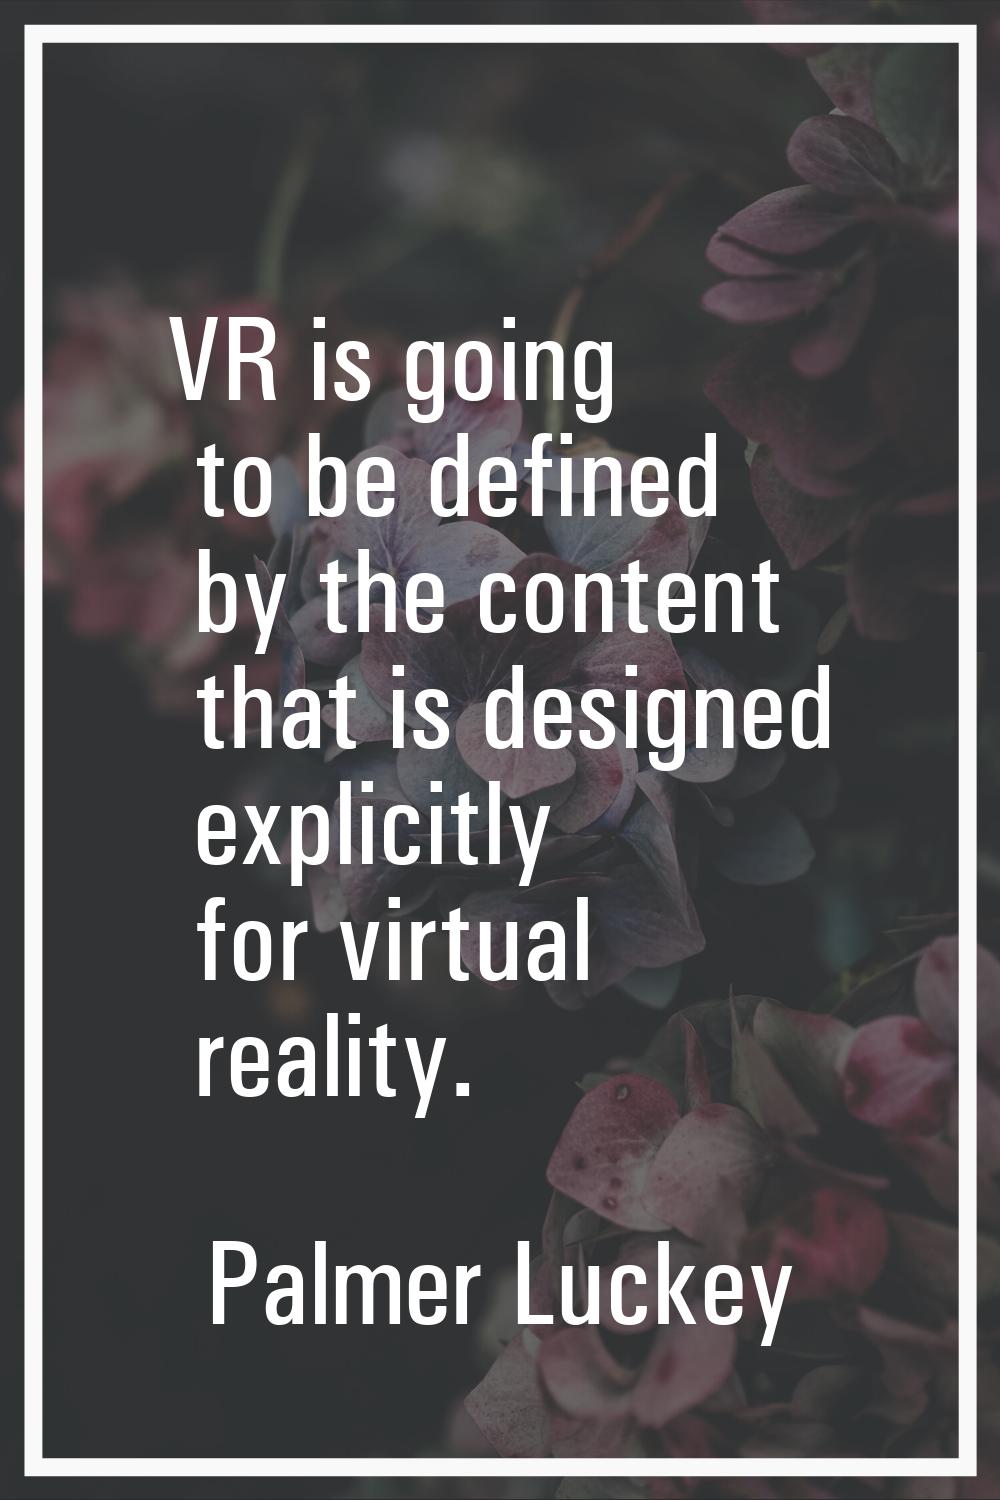 VR is going to be defined by the content that is designed explicitly for virtual reality.